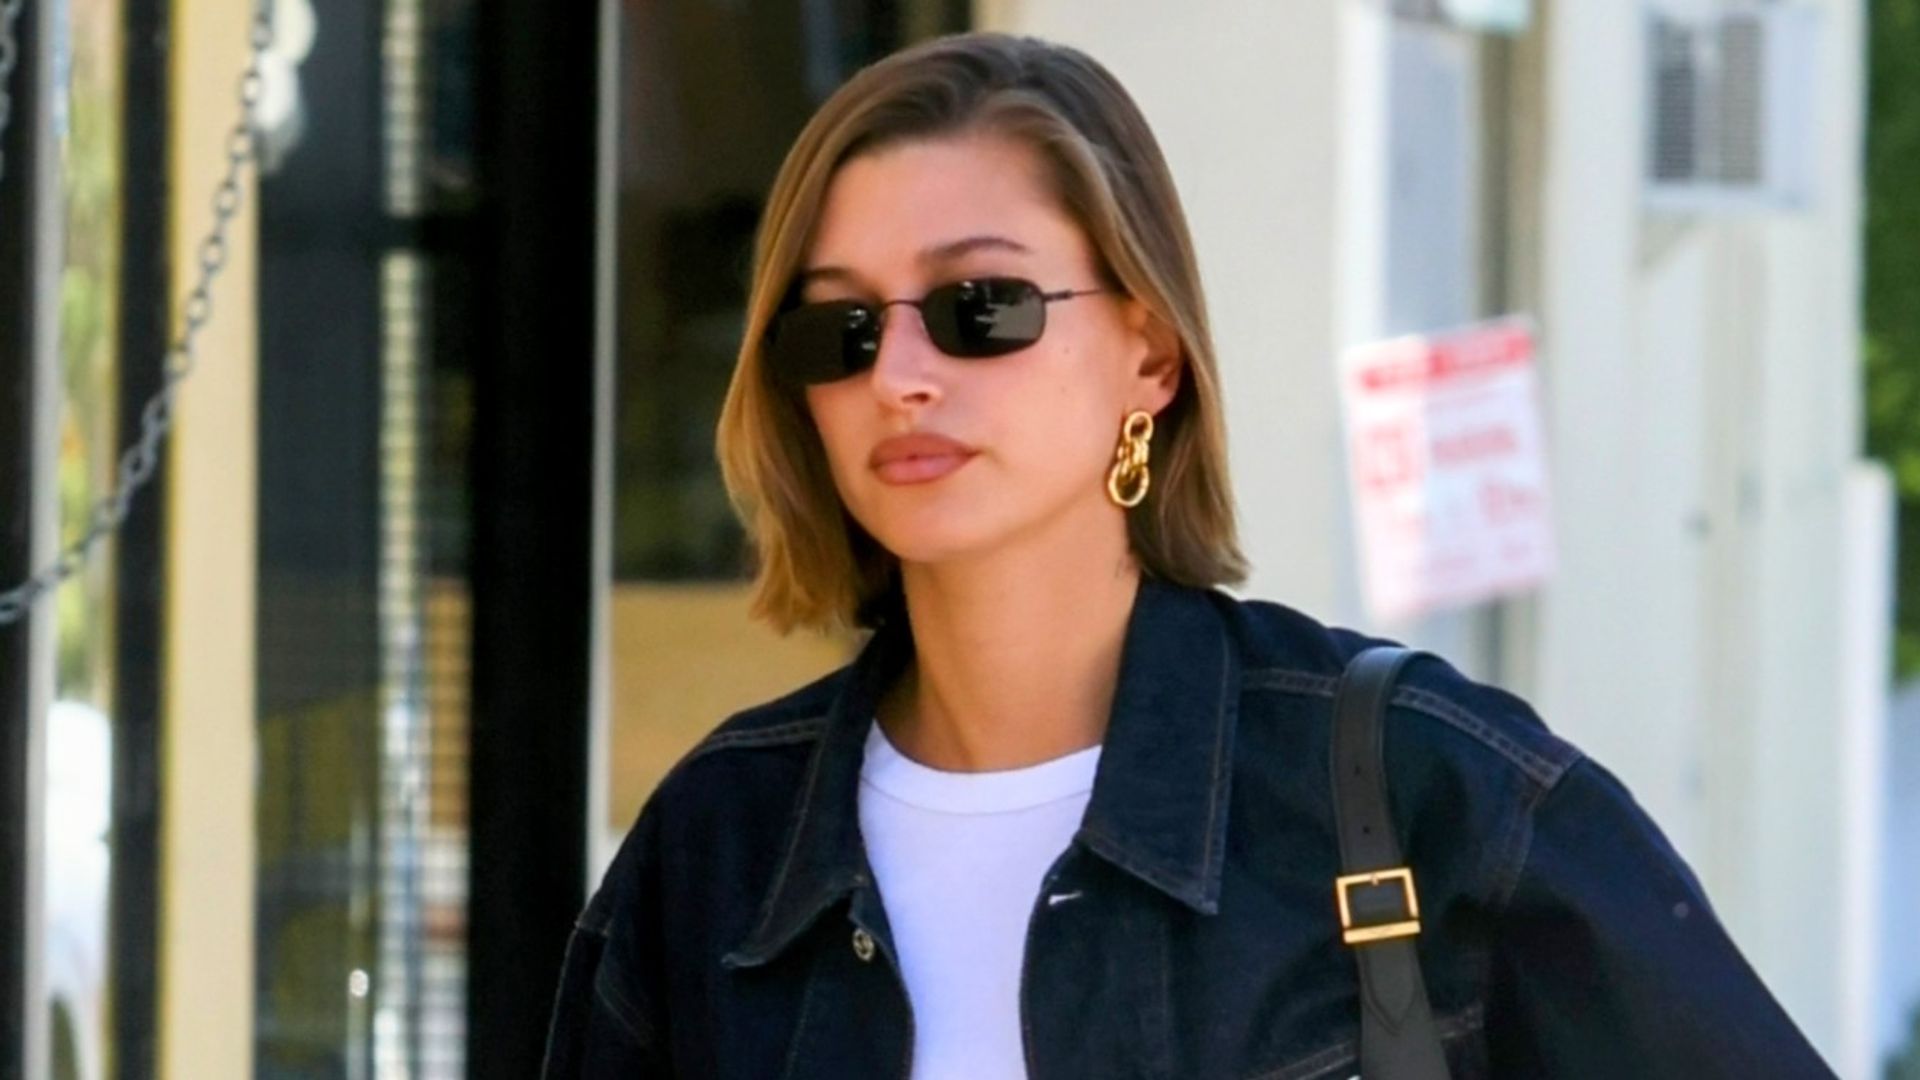 Hailey Bieber just proved it, ankle socks are officially dead - see photos